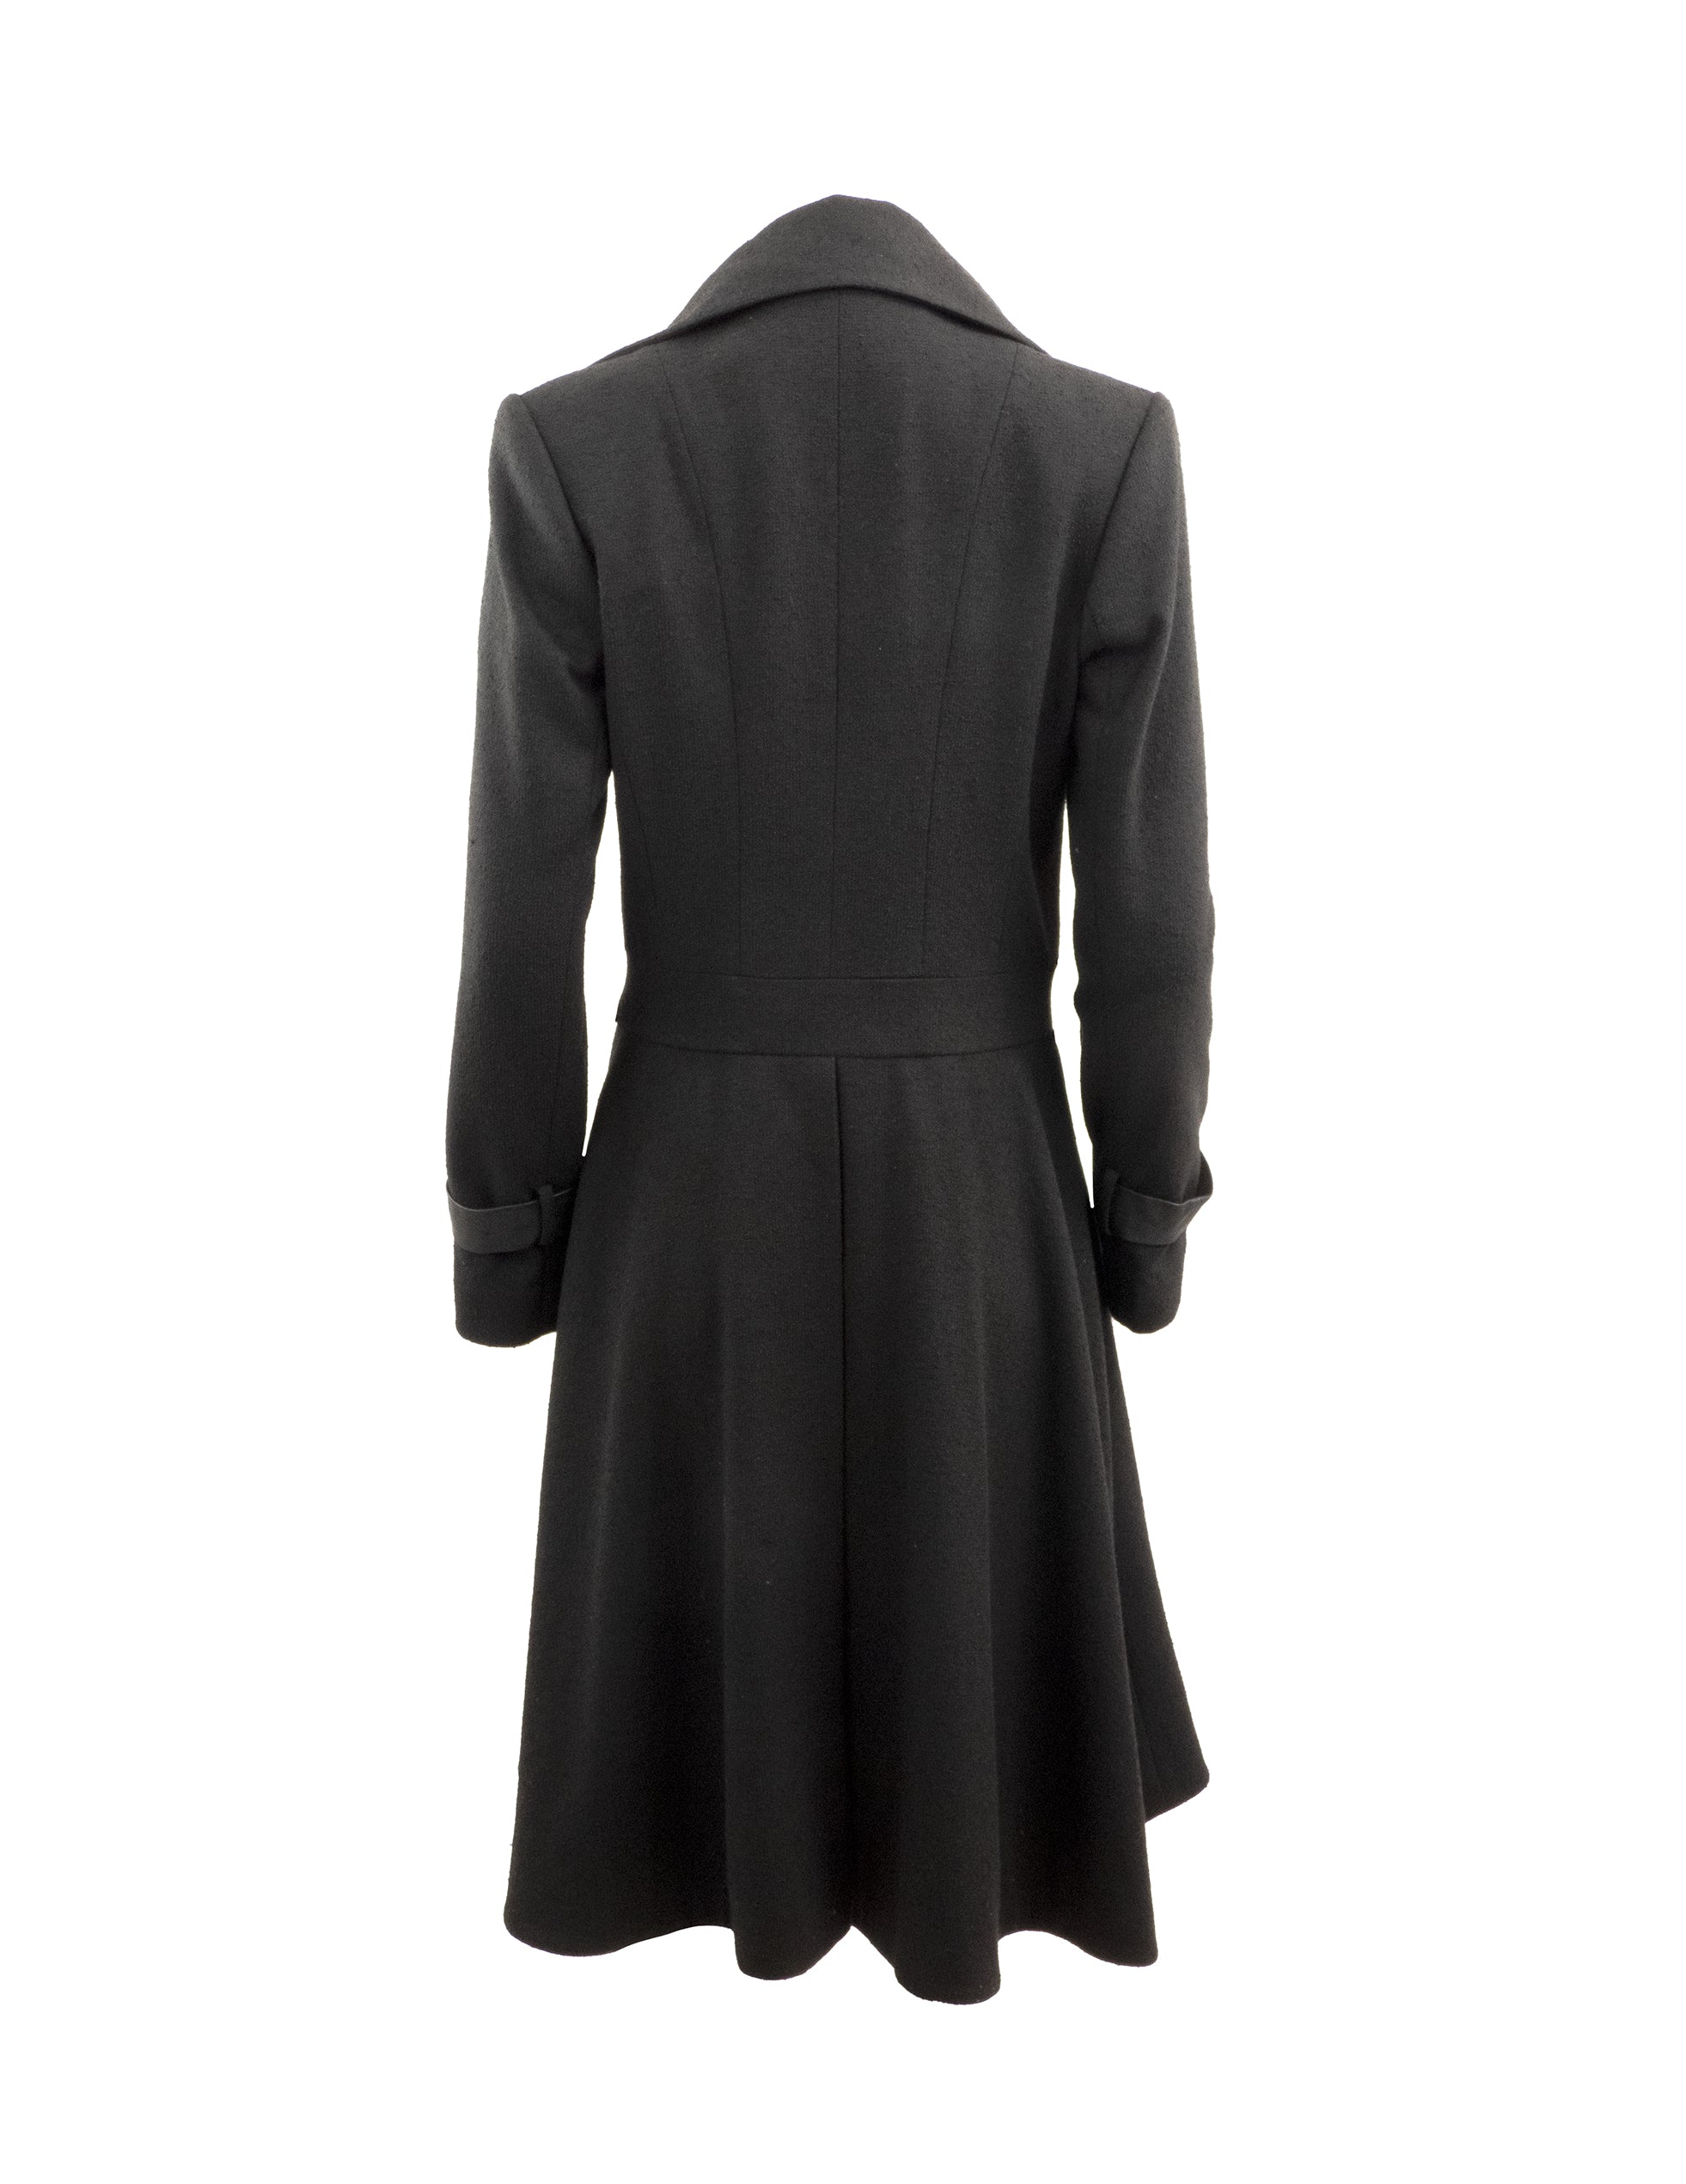 LOW DOUBLE BREASTED WOOL COAT WITH LEATHER DETAILING